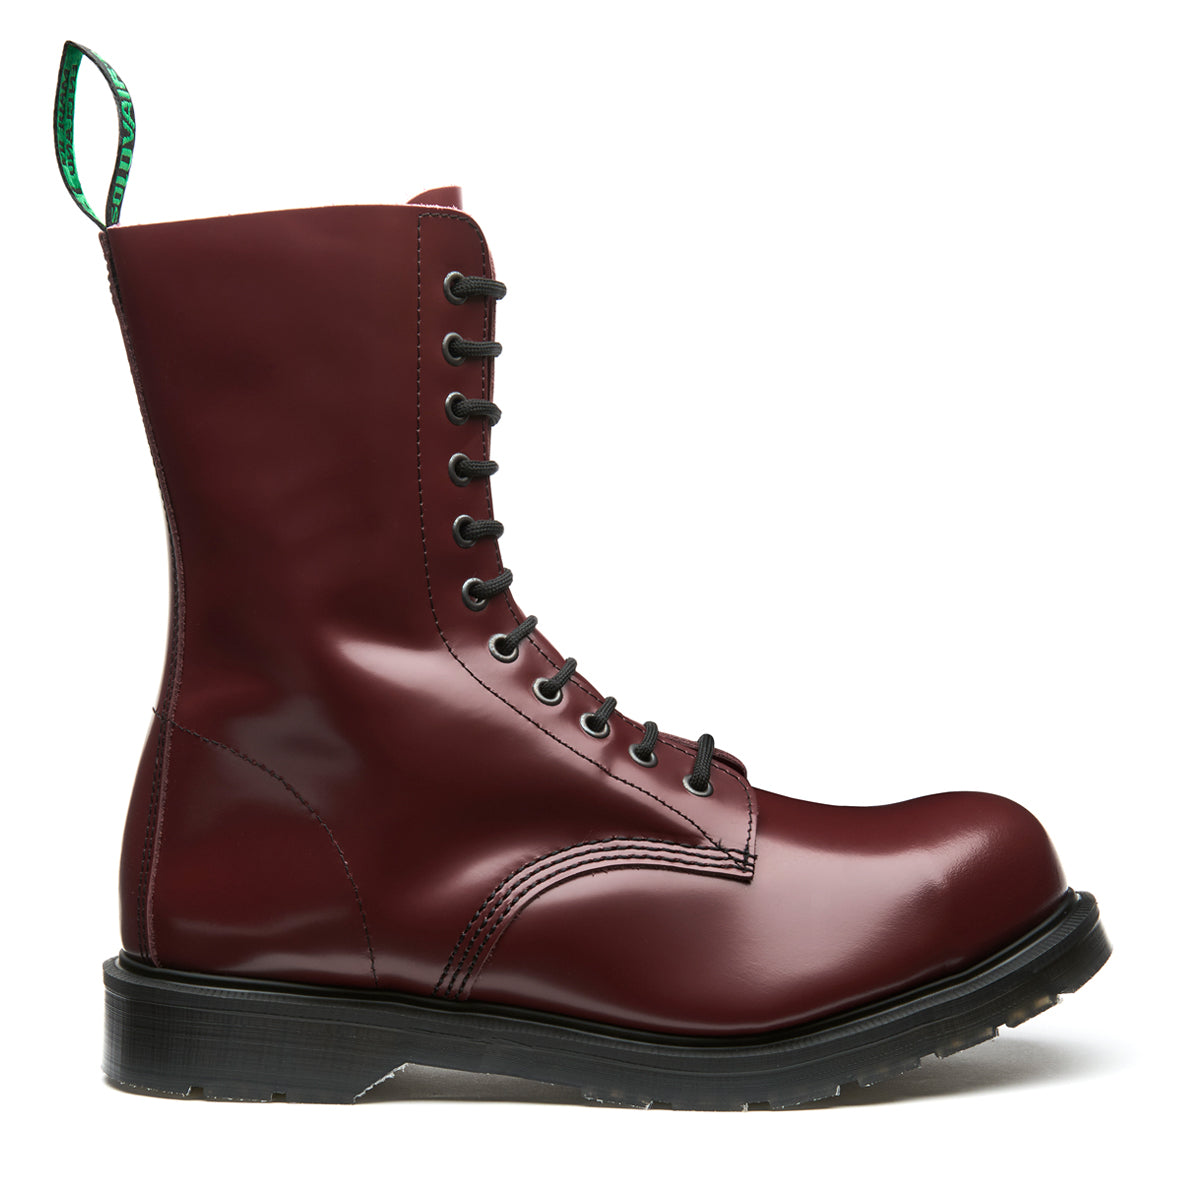 Cherry Red Hi-Shine 11 Eye Steel Toe Derby Boot | Solovair | Limited ...